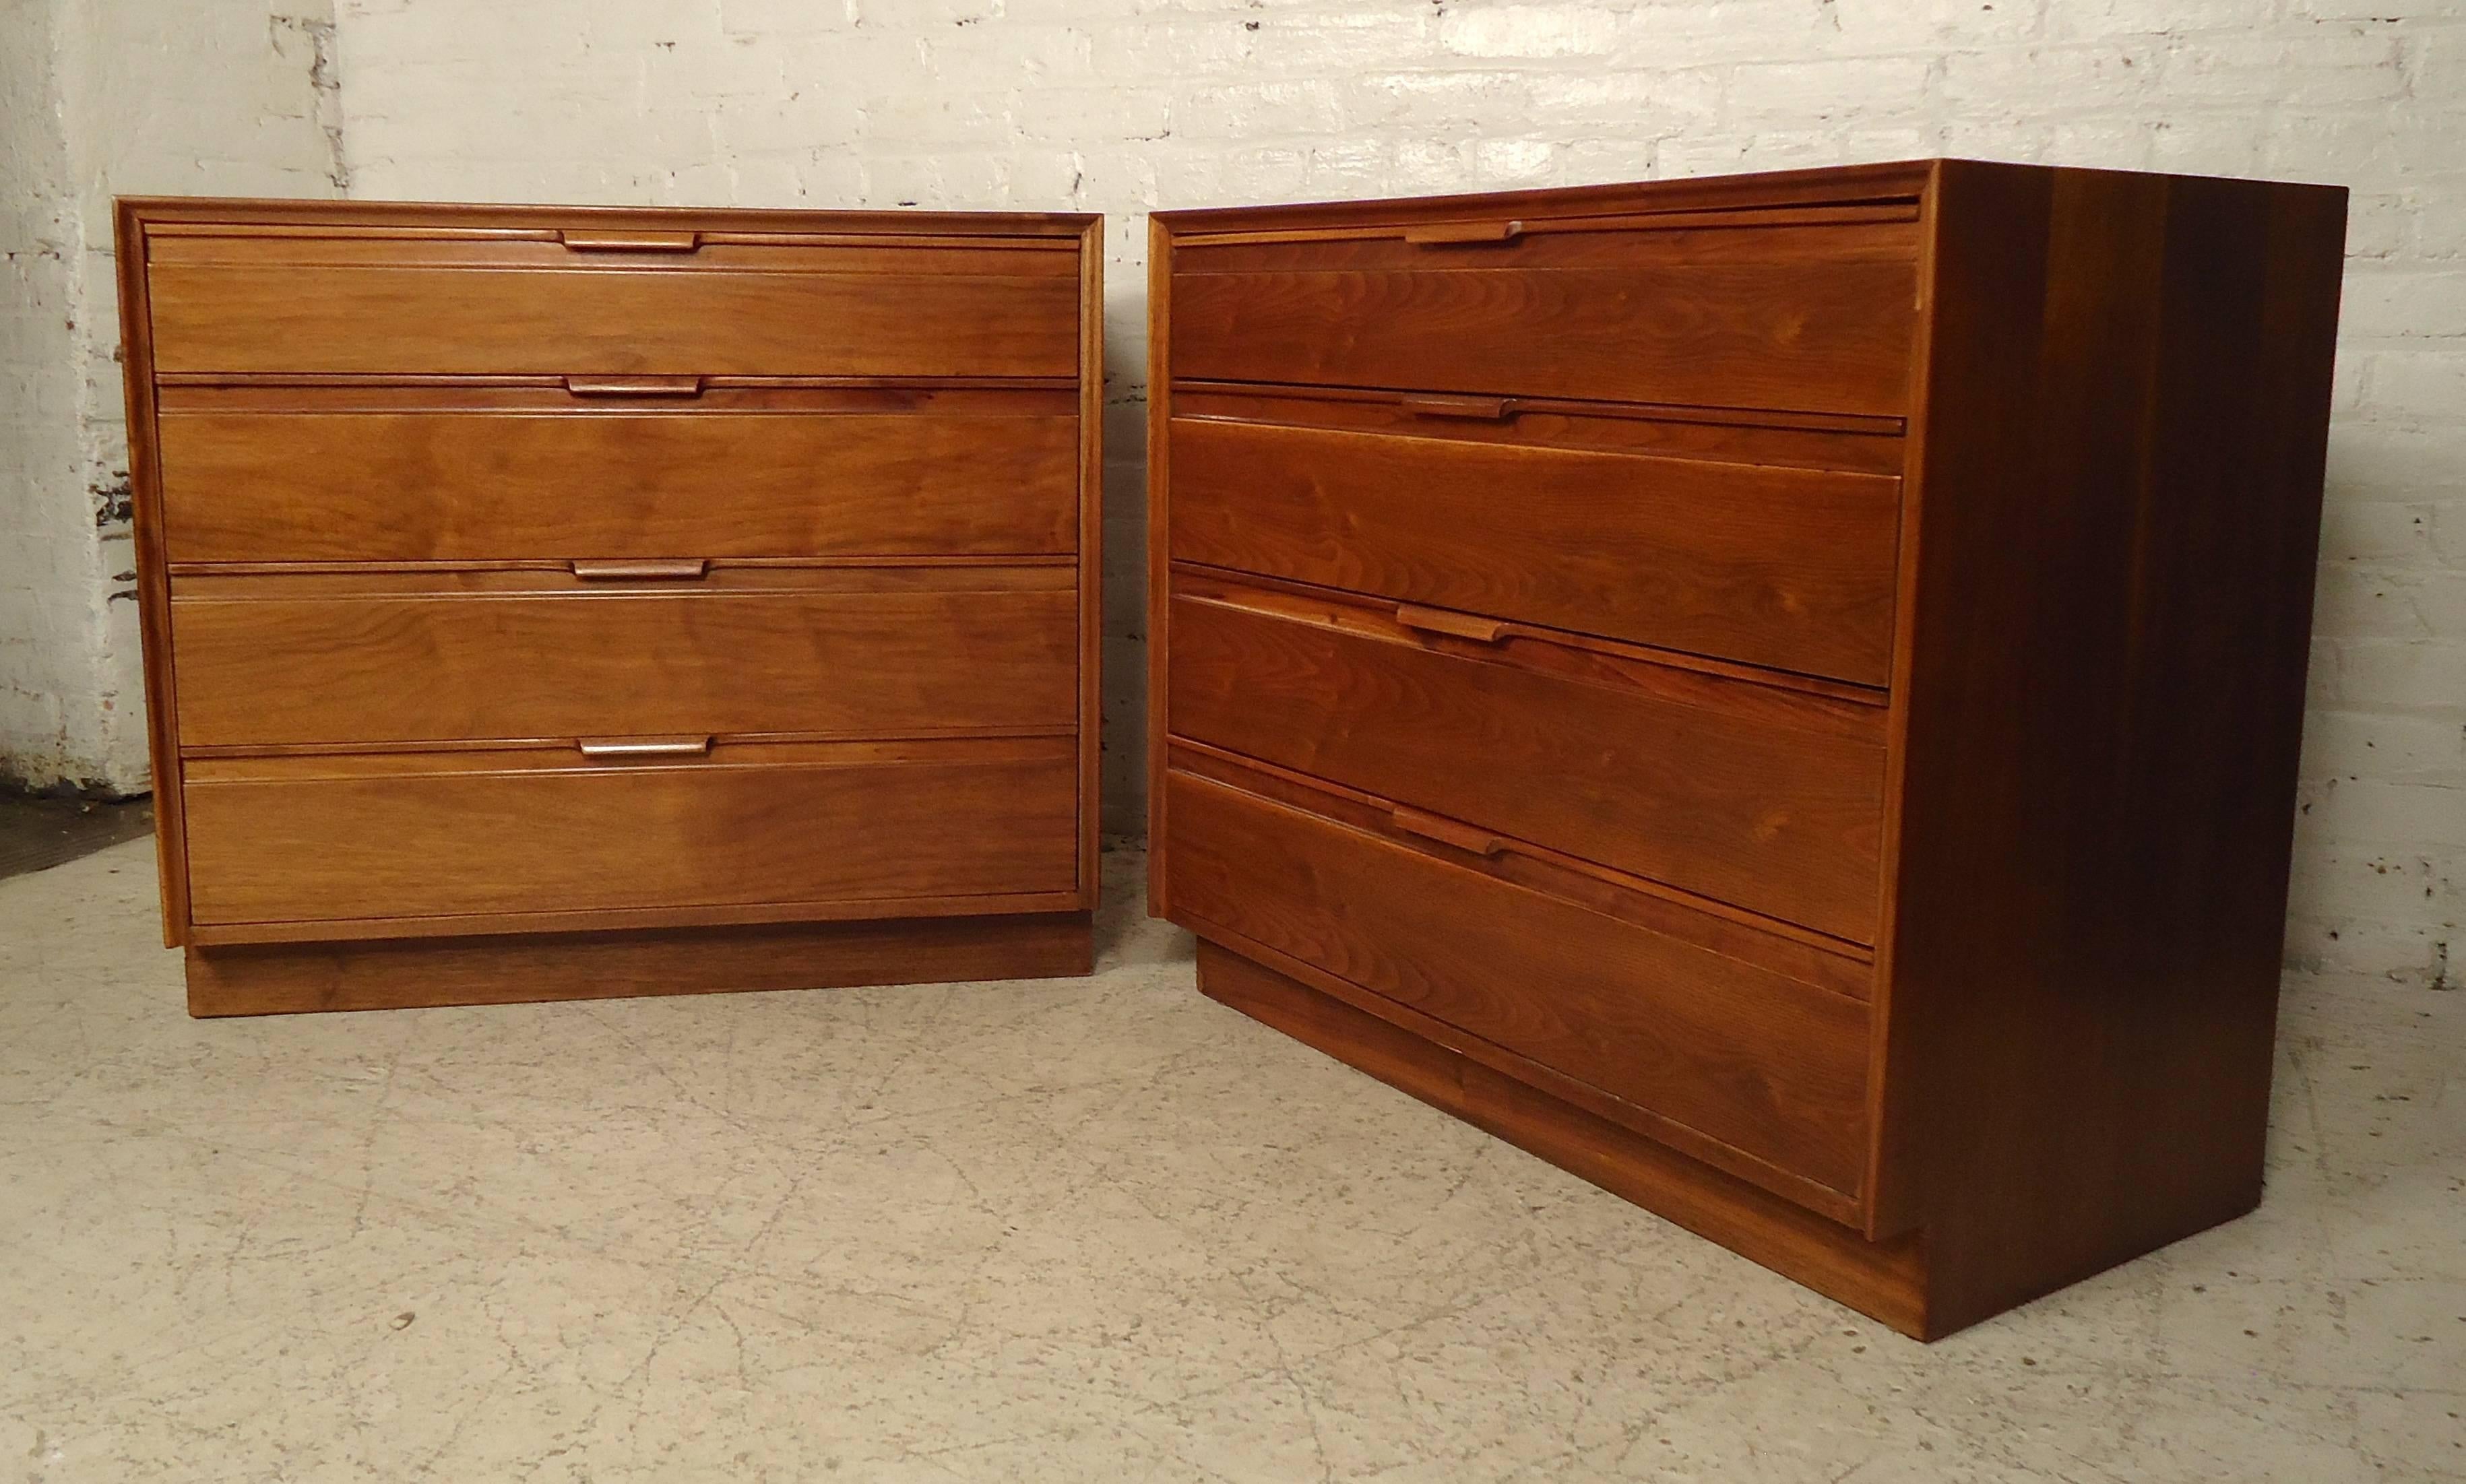 Vintage-modern pair of short dressers by American of Martinsville. Made of rich walnut grain features four wide drawers with sculpted handles on a sturdy base.

Please confirm item location (NY or NJ.)